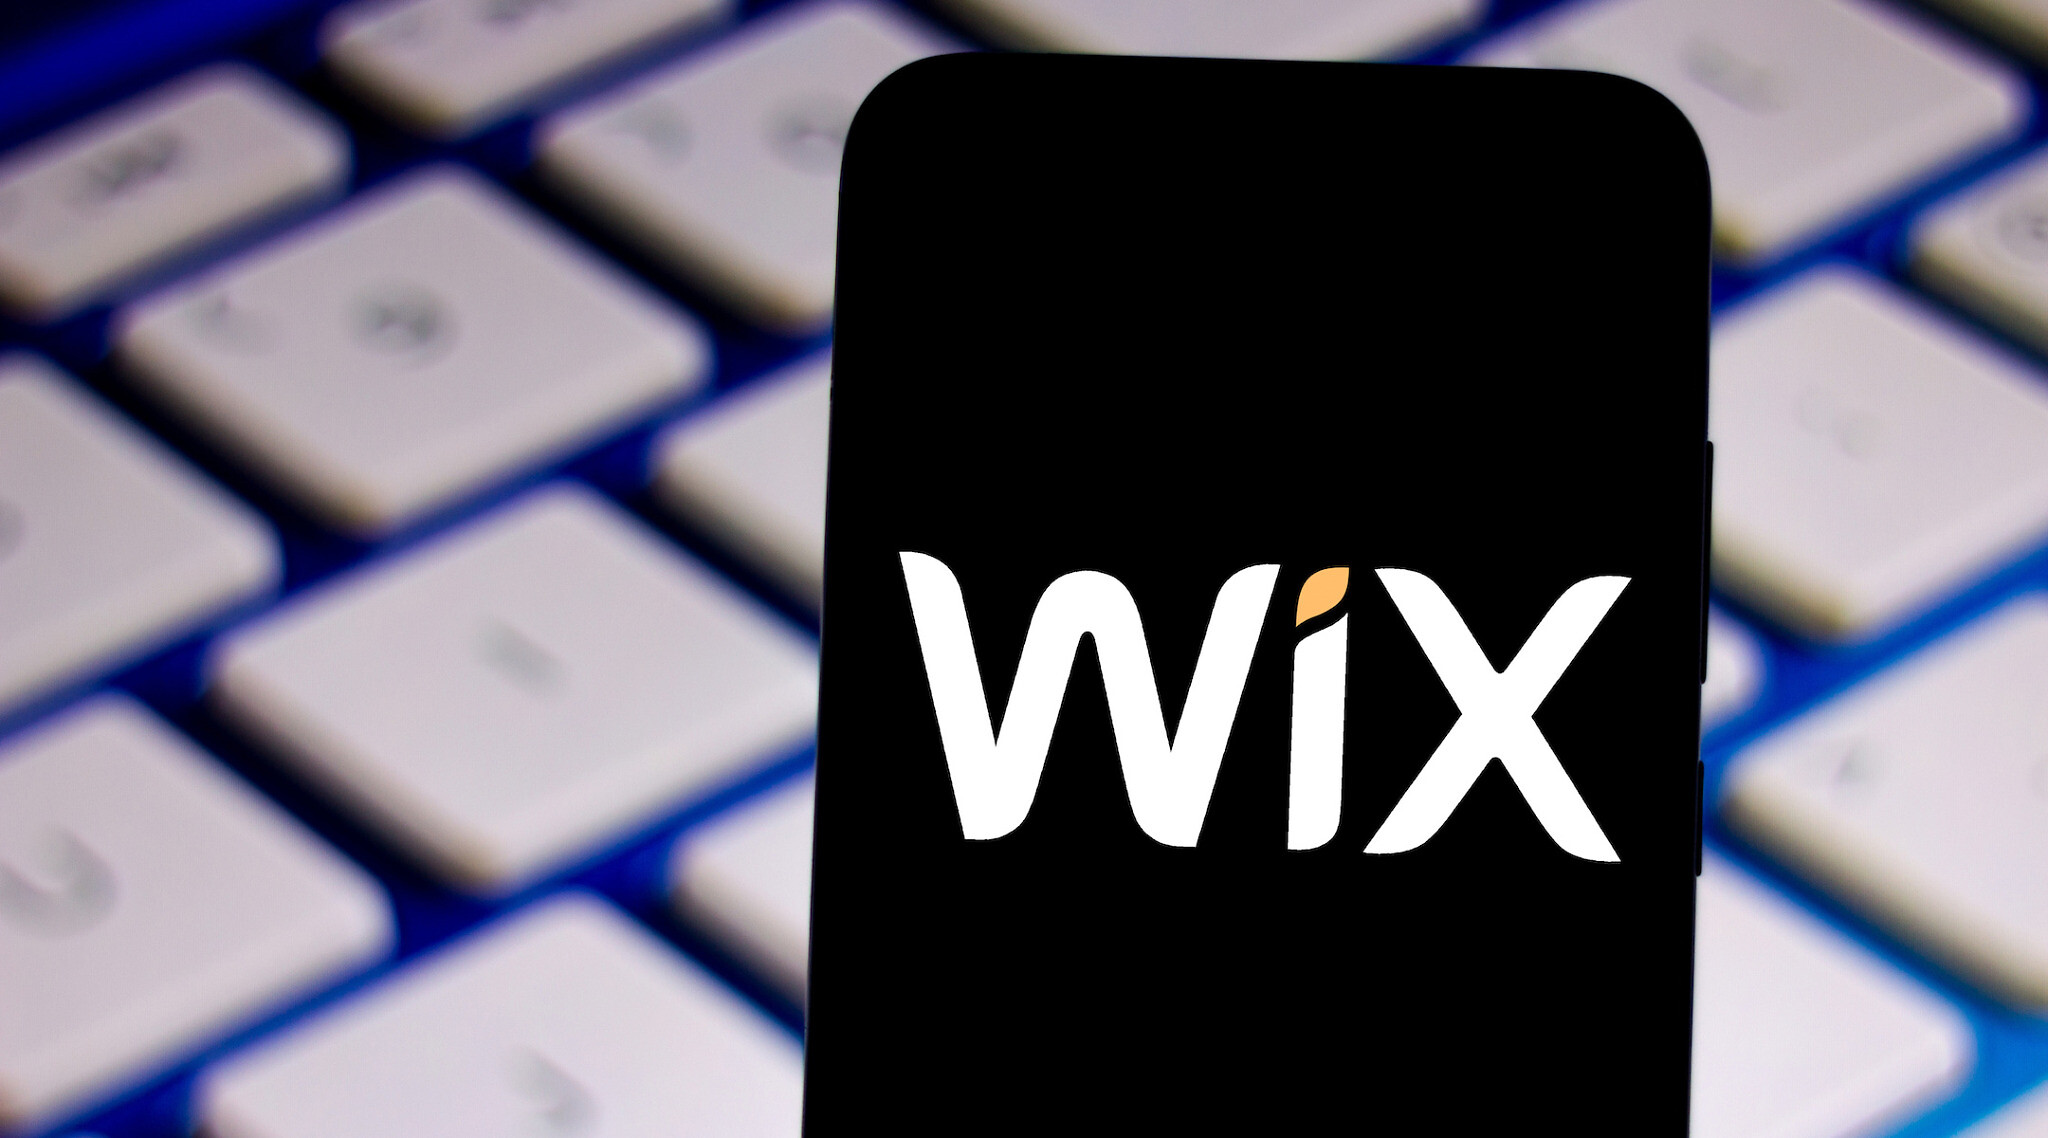 Helped by coronavirus crisis, Wix becomes Israel's second-highest valued company | The Times of Israel